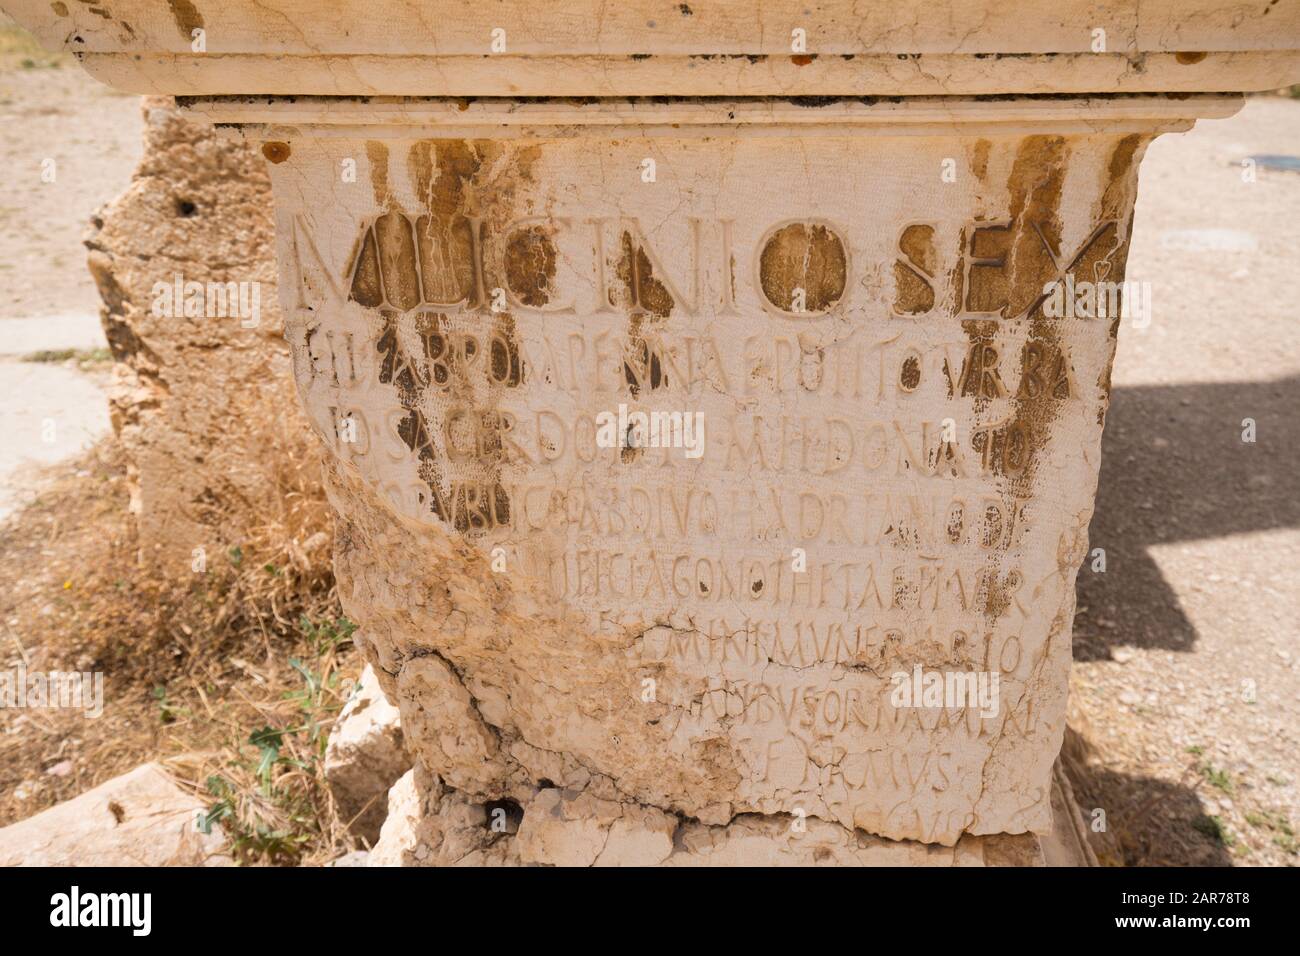 Roman inscription inside the Great Court. The ruins of the Roman city of Heliopolis or Baalbek in the Beqaa Valley. Baalbek, Lebanon - June, 2019 Stock Photo